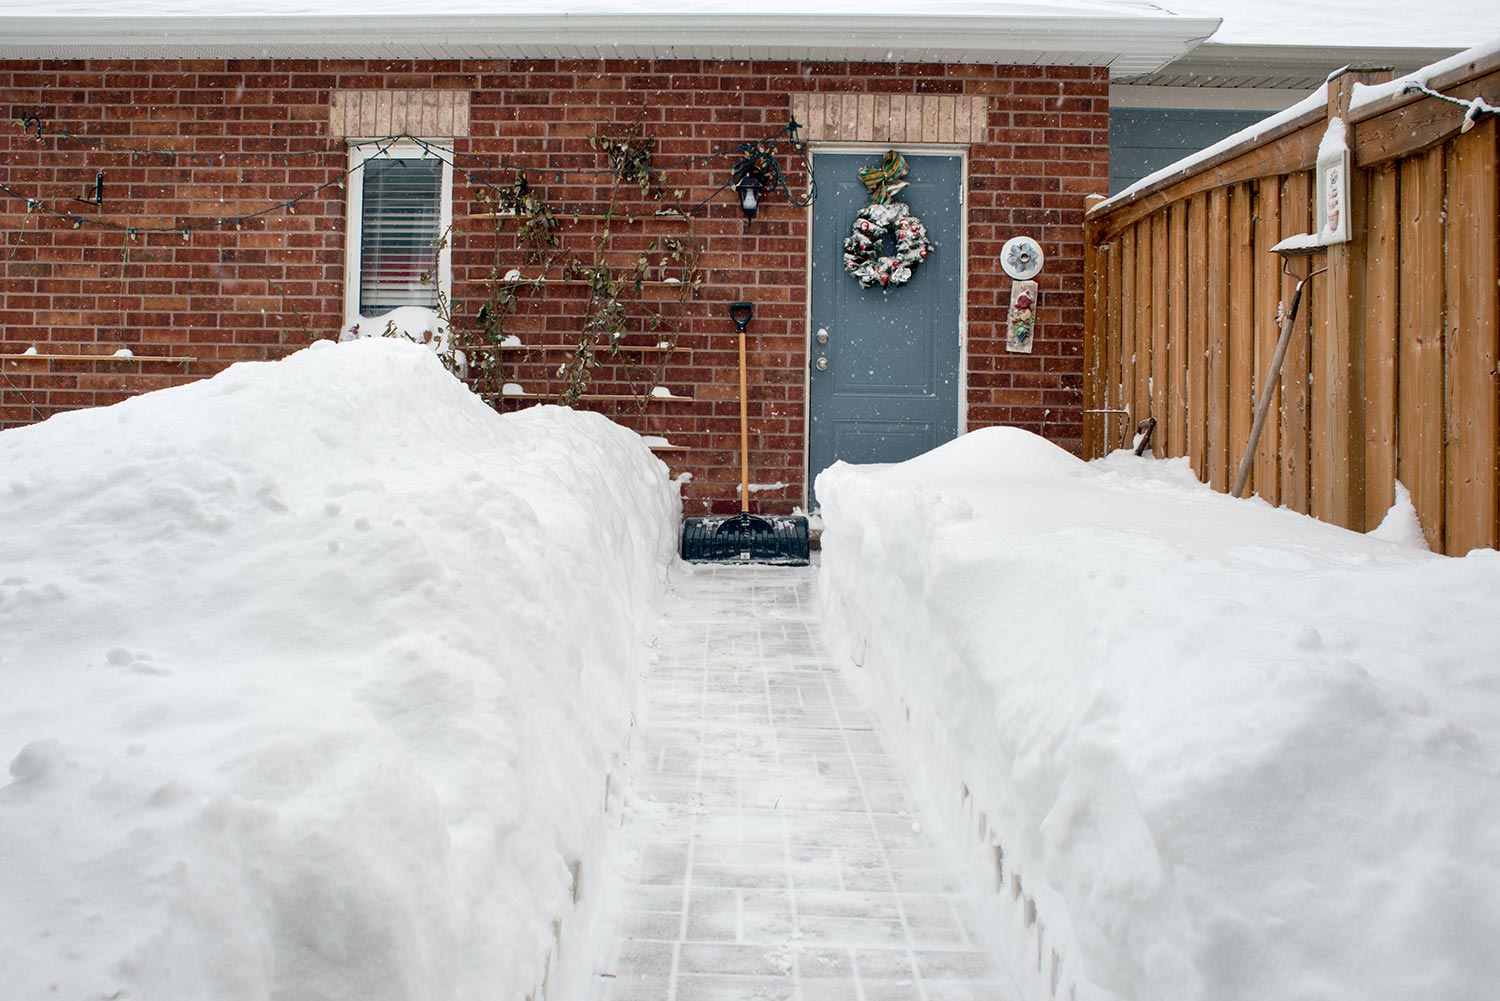 Residential garden covered in 2 feet of deep snow